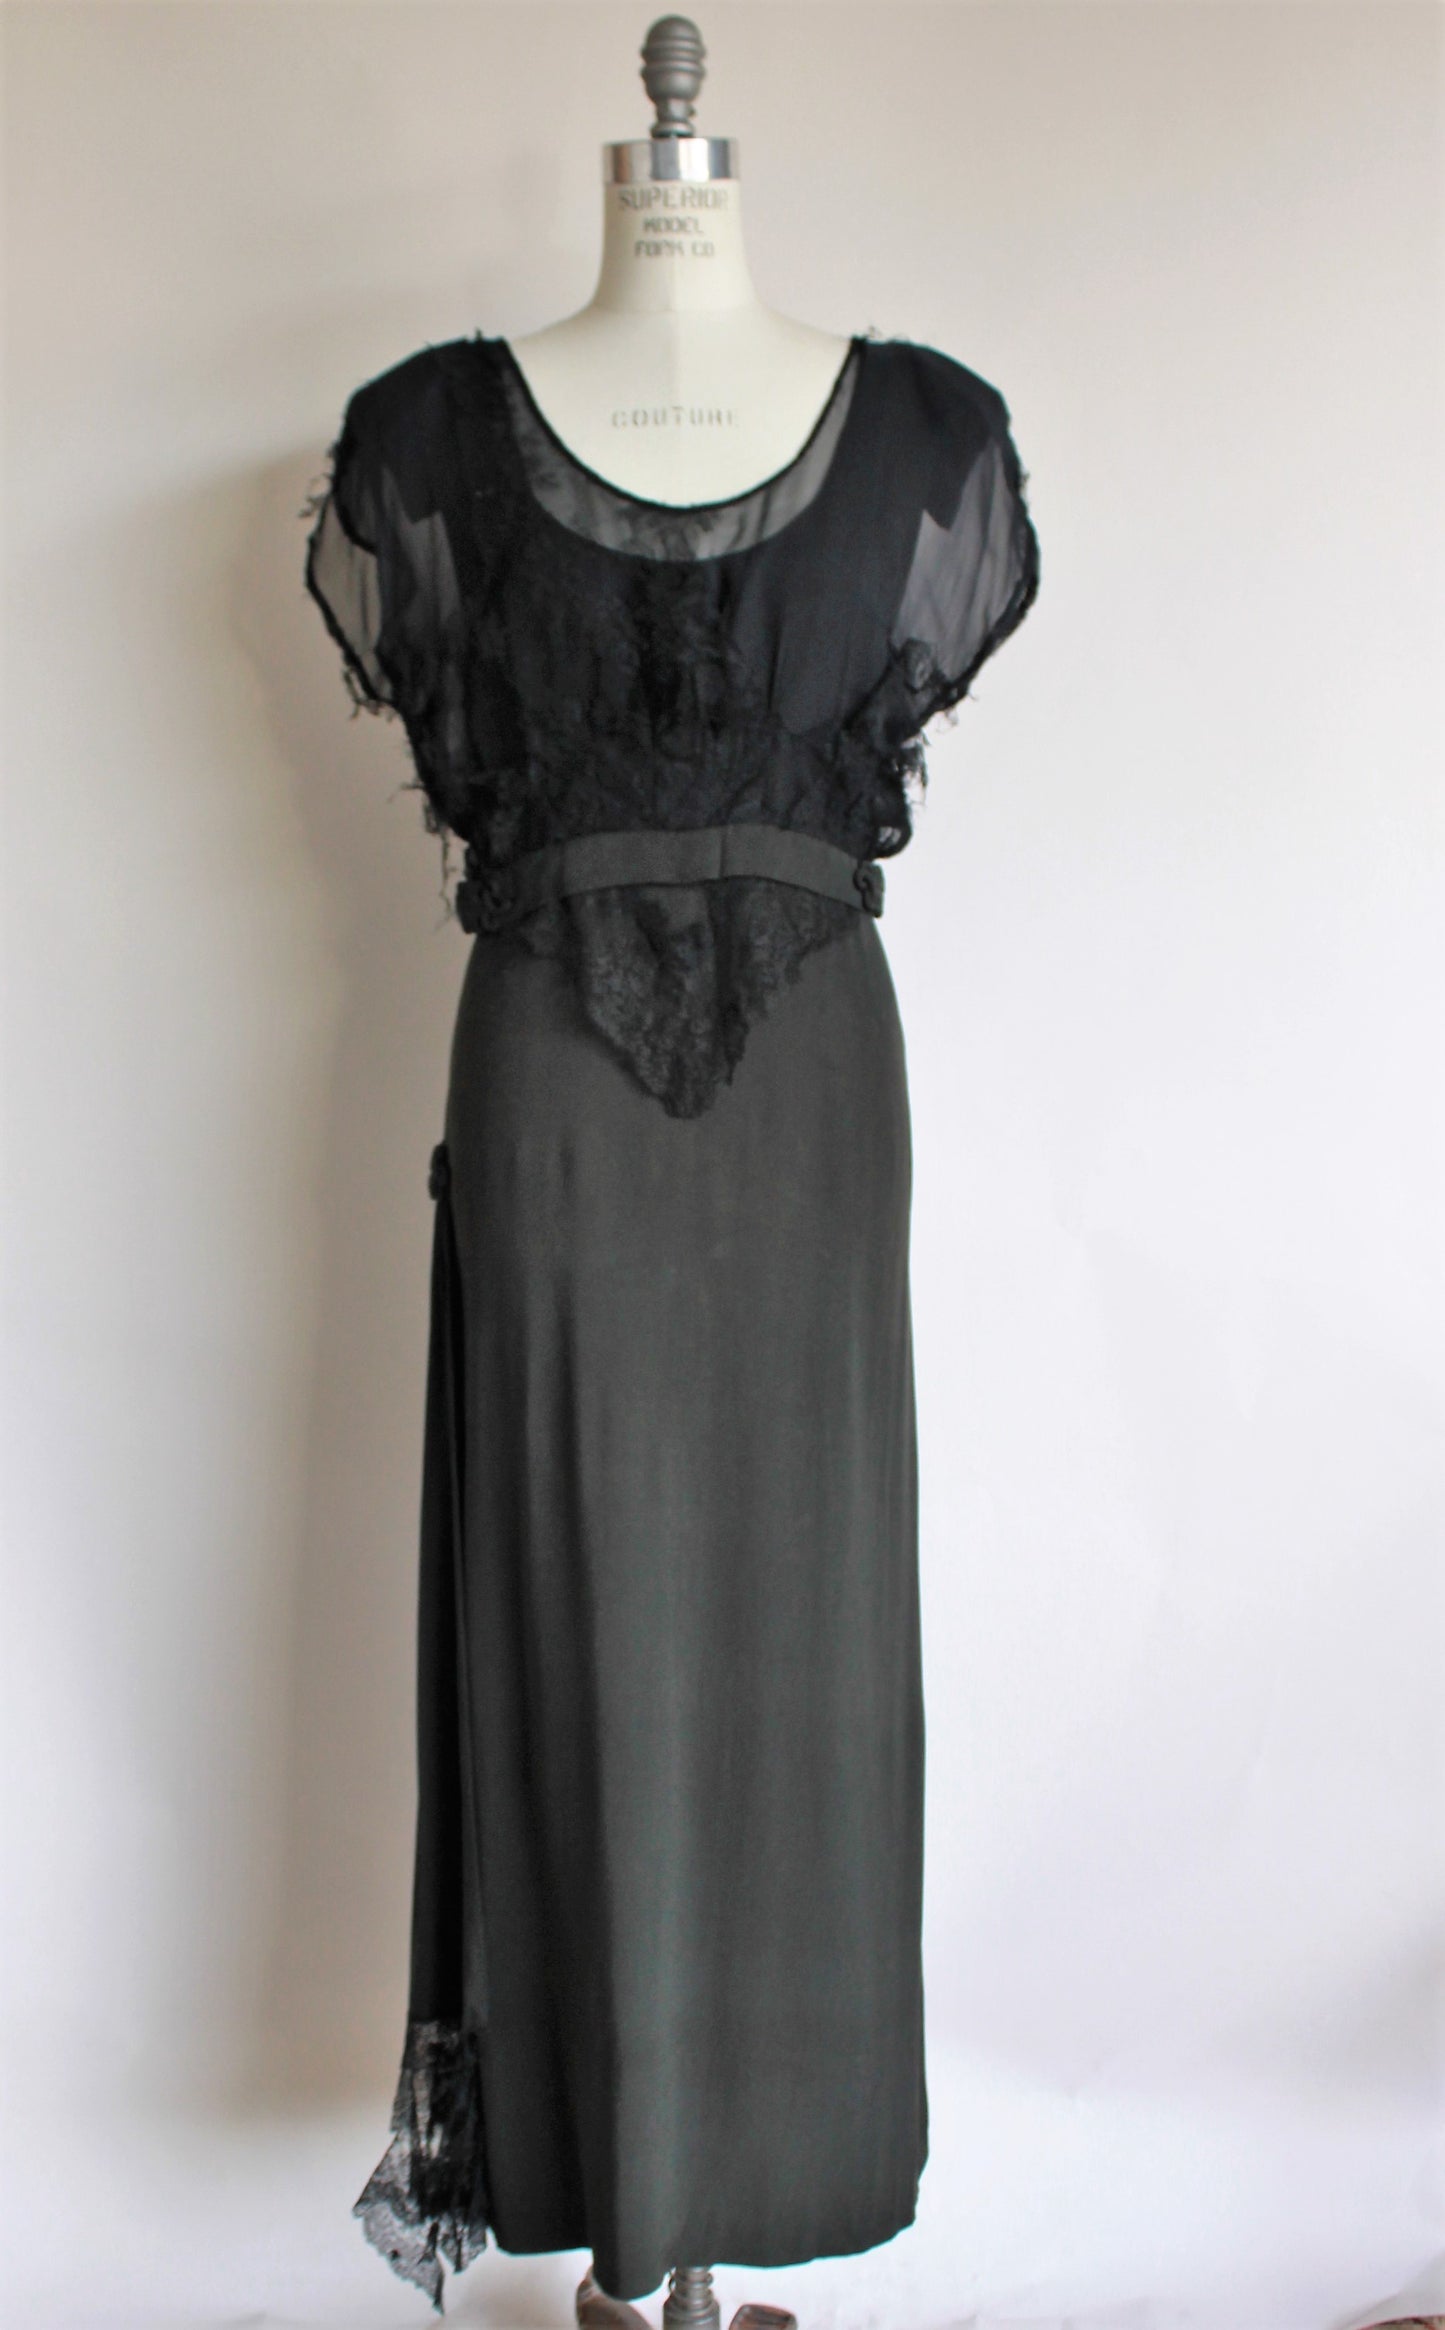 Vintage 1940s Black Rayon Dress With Lace Blouse – Toadstool Farm Vintage